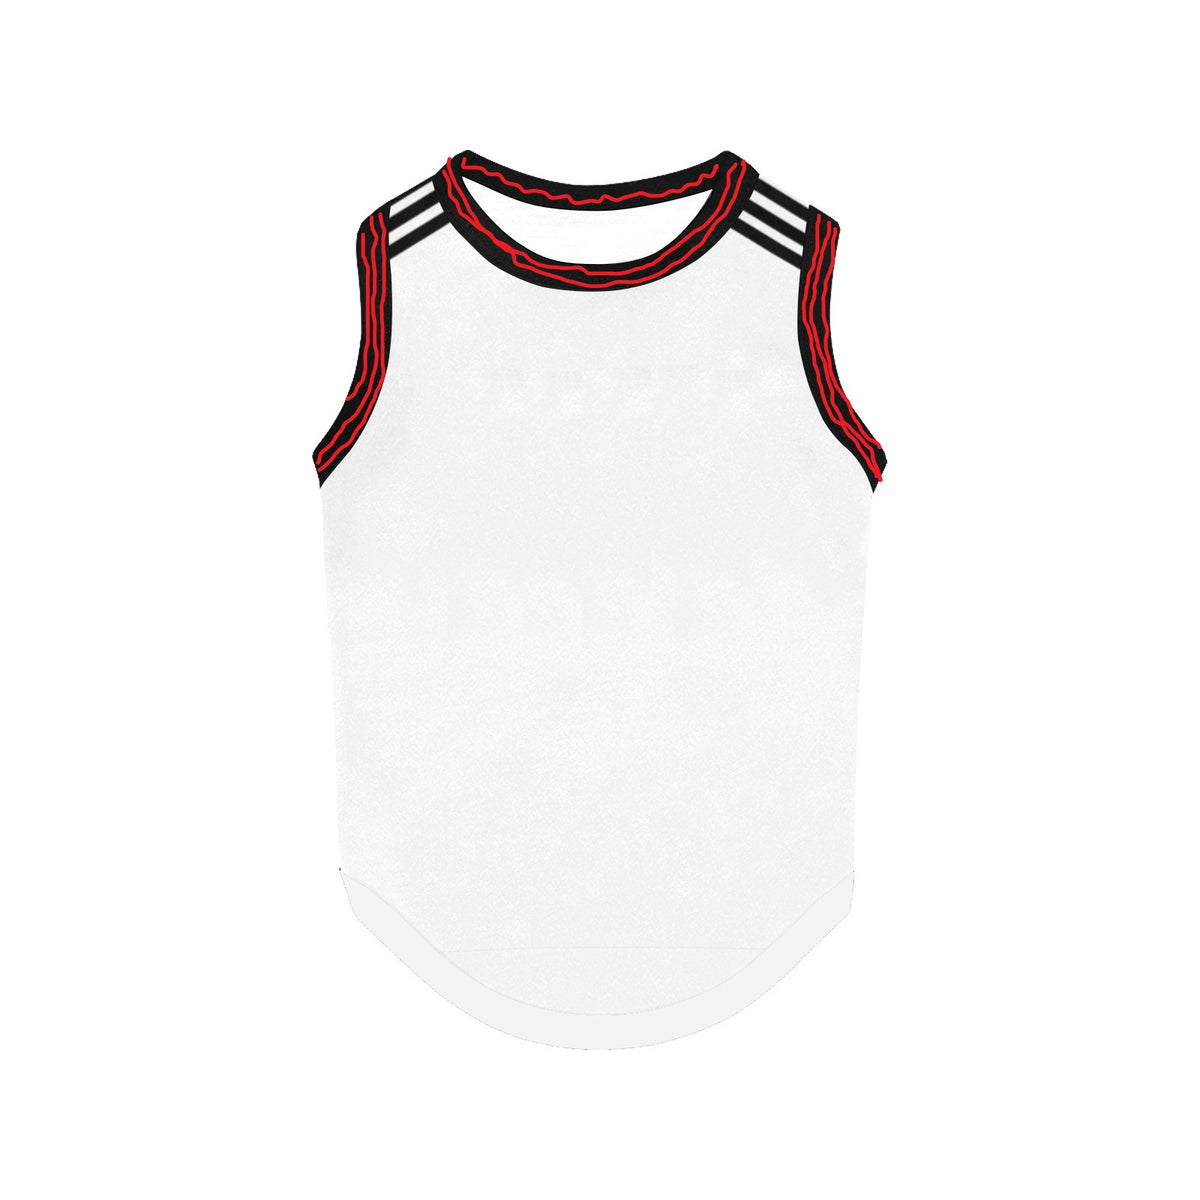 Fulham FC Inspired Personalized Jersey Tank